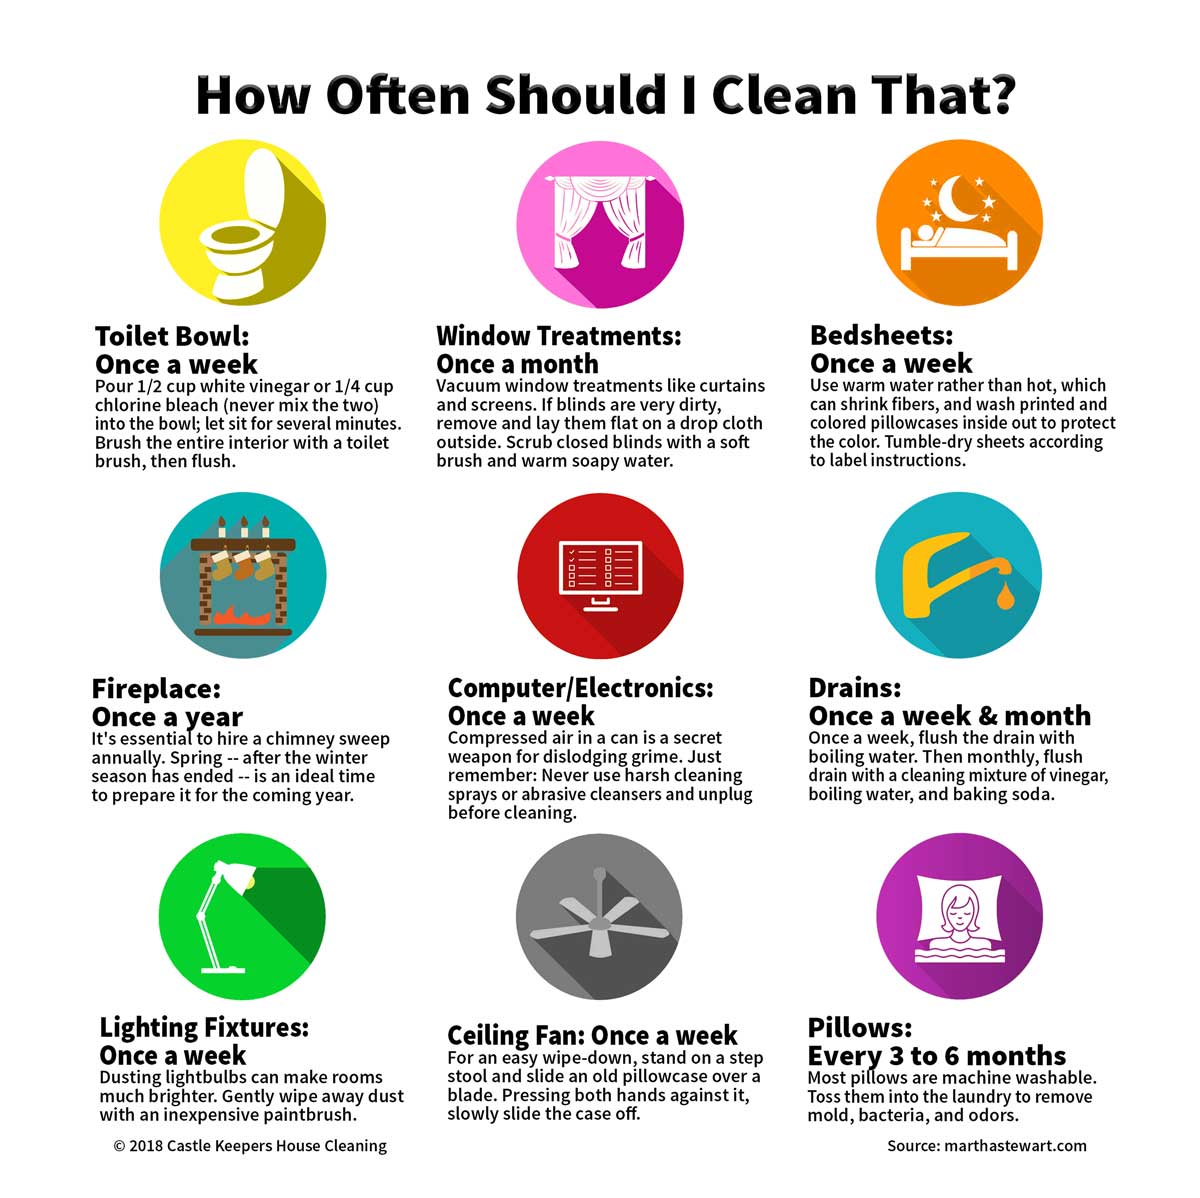 https://castle-keepers.com/wp-content/uploads/2018/05/Infographic-How-often-should-I-clean-that-infographic.jpg